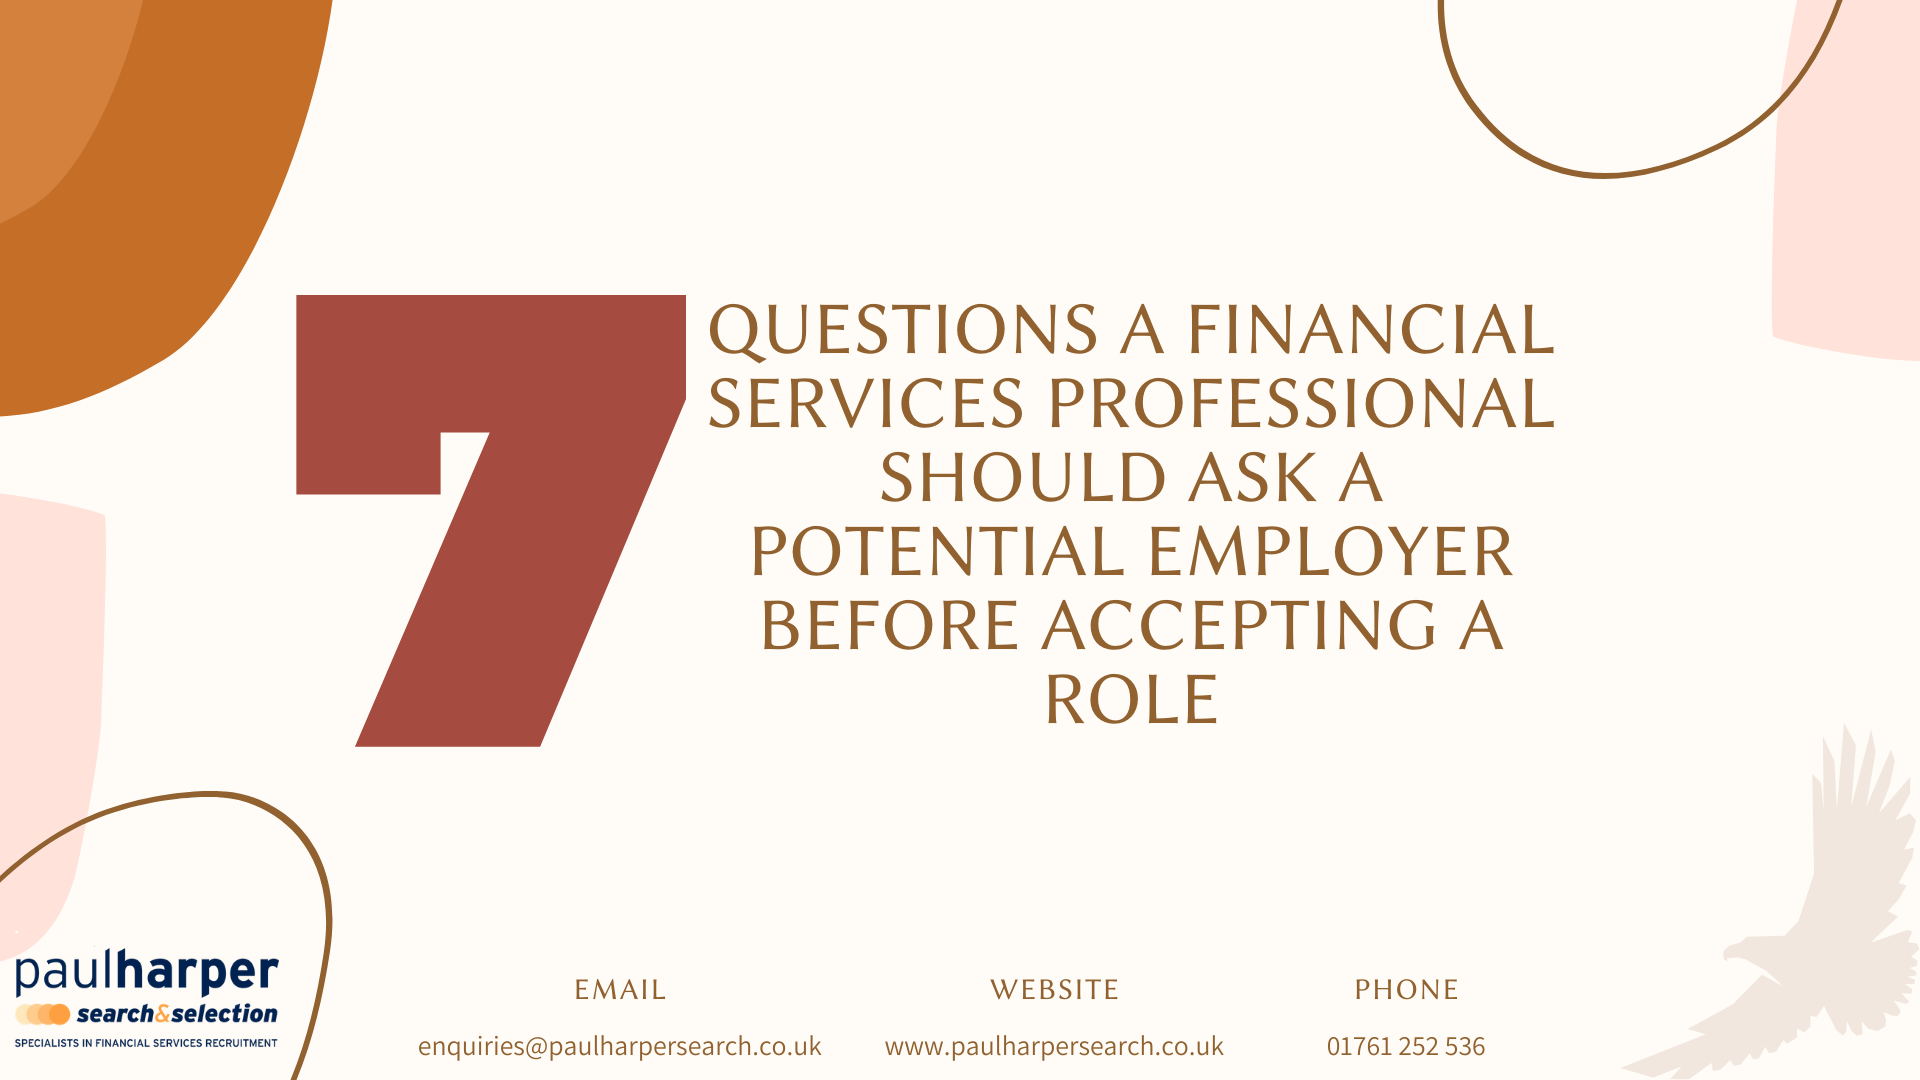 7 Questions a Financial Services Professional Should ask a Potential Employer before Accepting a Role